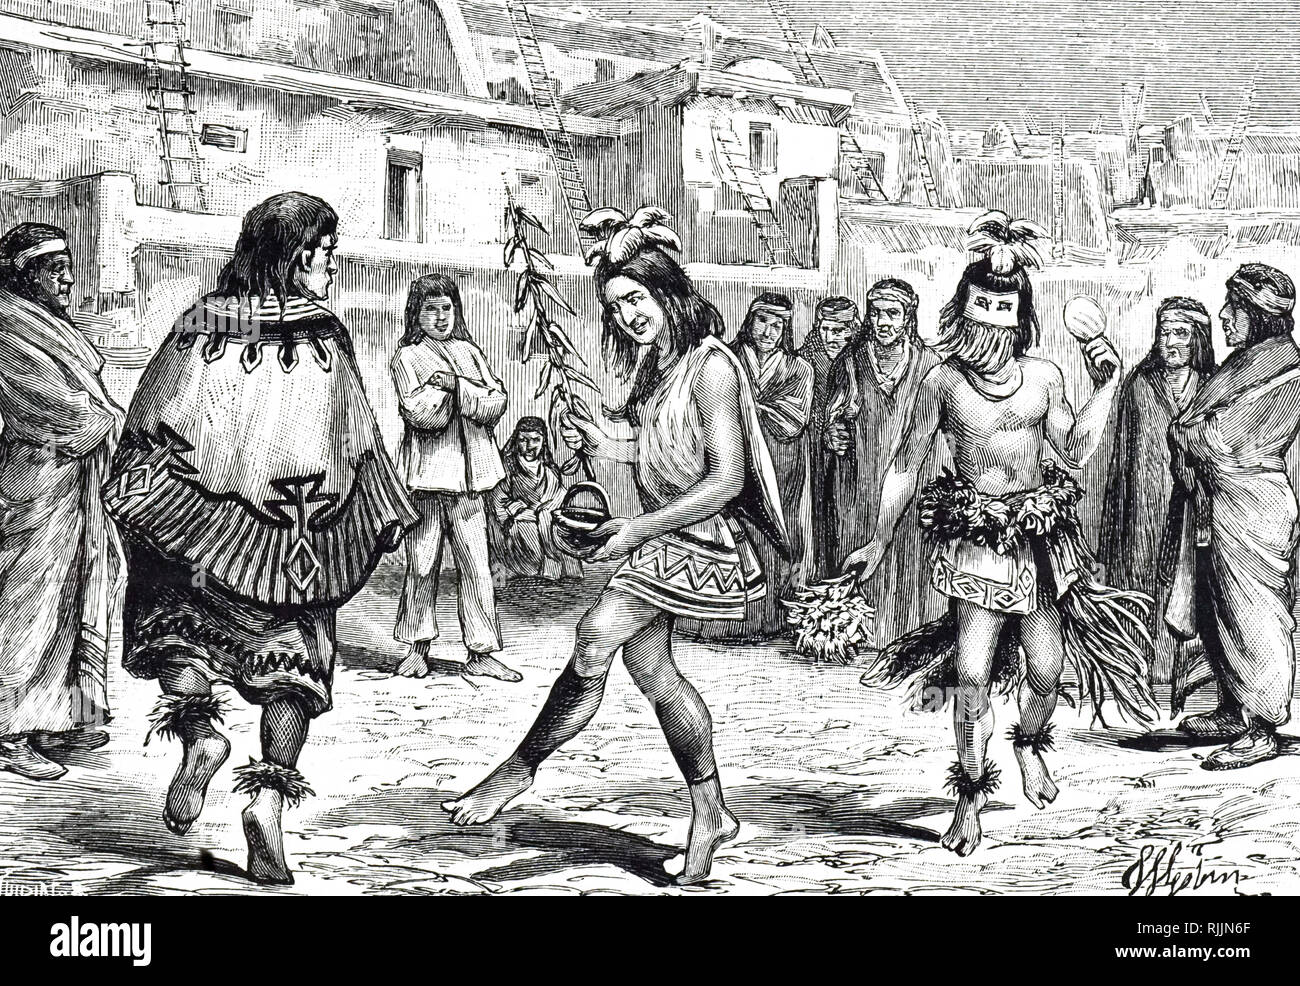 An engraving depicting Zuni Indians (Pueblo Indians of New Mexico) performing a sacred dance, perhaps to bring the rain. In costumes and masks, the men impersonate spirits or gods called Kachinas. Dated 19th century Stock Photo